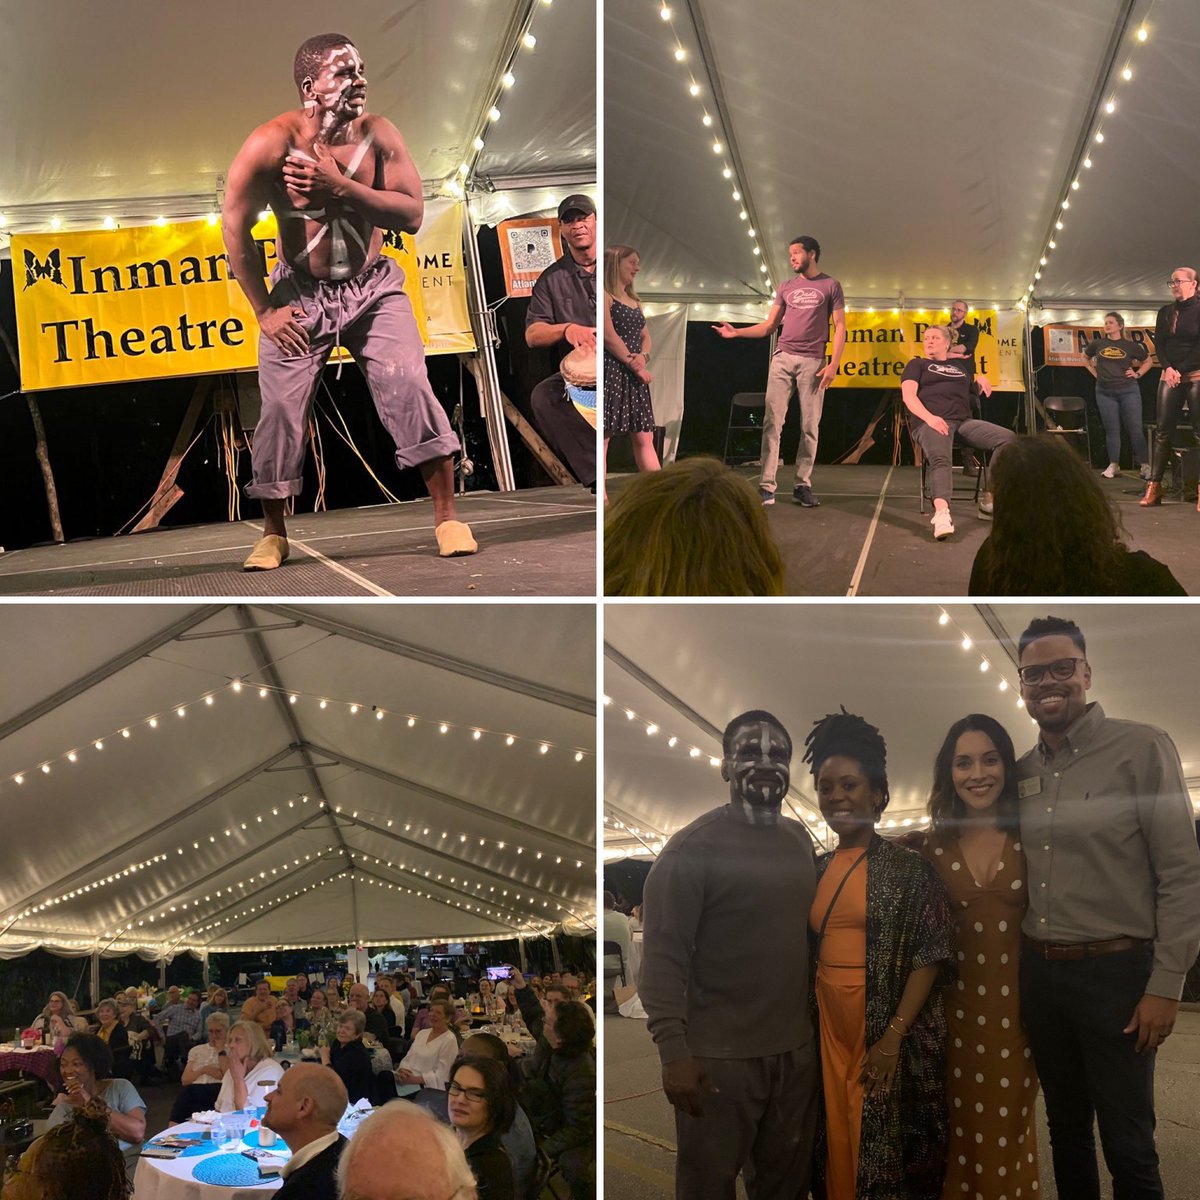 Another amazing Inman Park festival in the books! Theater night was a hit last night in support of @dads_garage @horizontheatre @7StagesATL — and an unexpected reunion with old friends off stage.